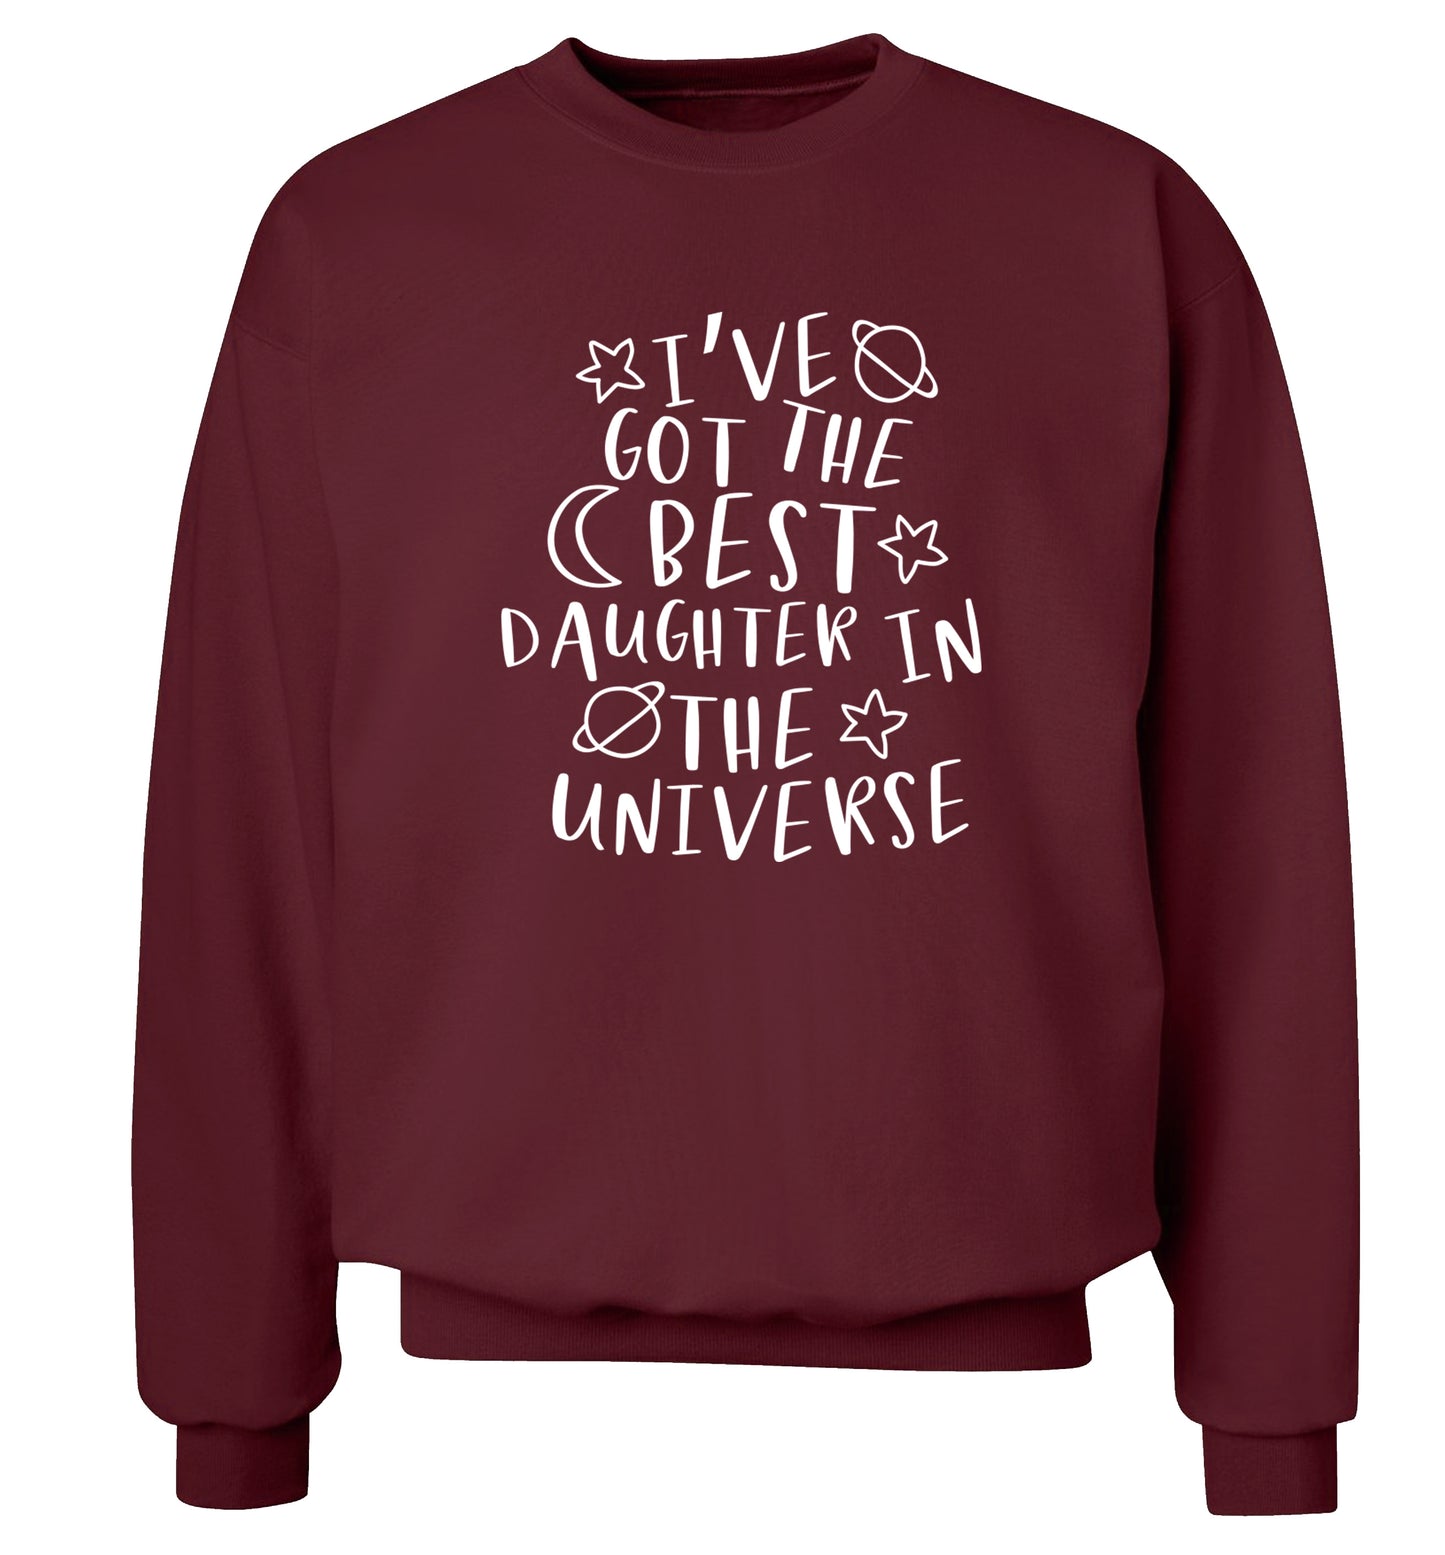 I've got the best daughter in the universe Adult's unisex maroon Sweater 2XL